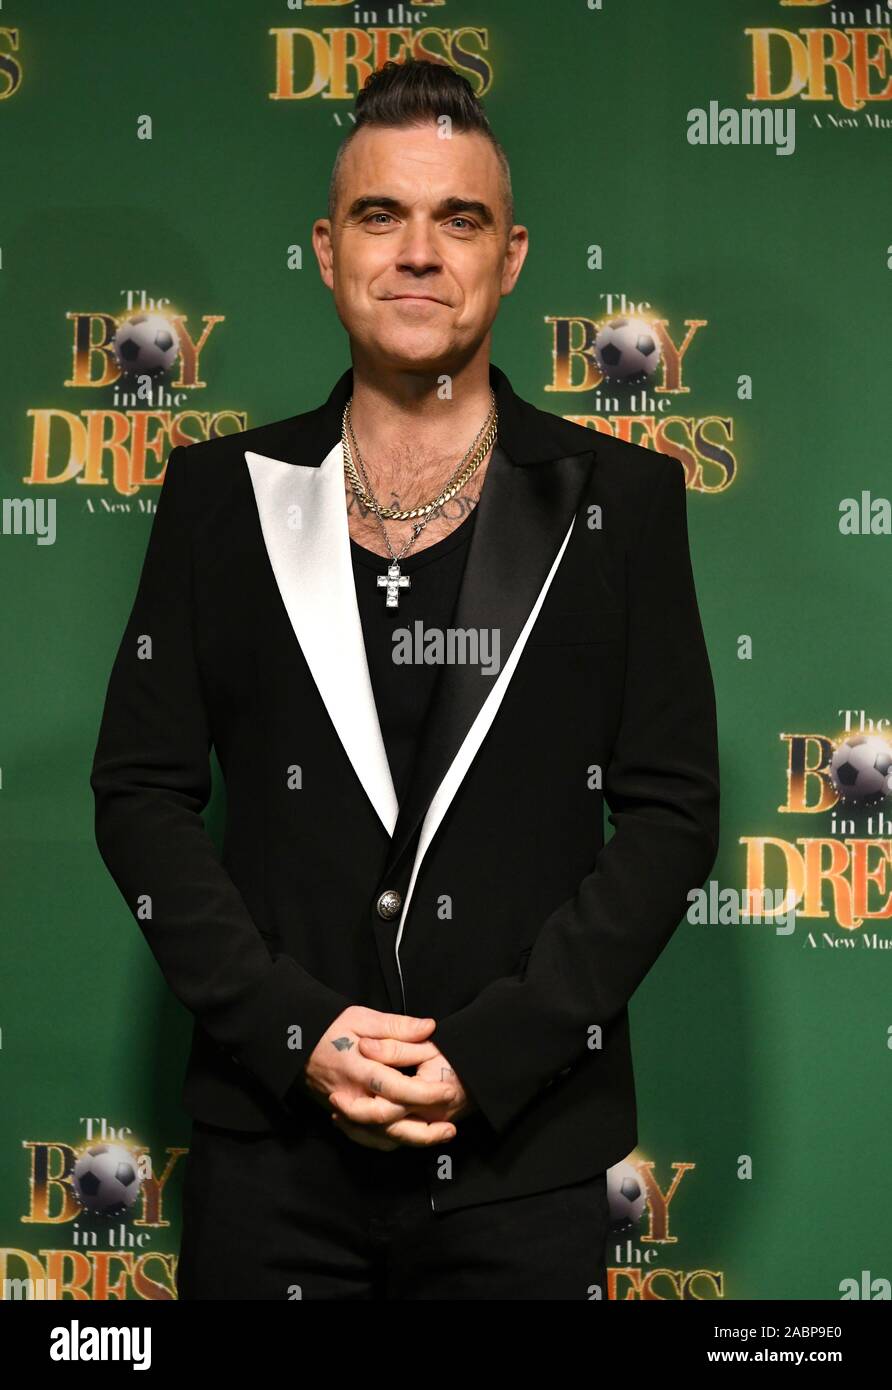 Stratford-upon-Avon, UK. 28th Nov 2019. Robbie Williams at the opening night of the RSC production of 'The Boy in the Dress' at The Royal Shakespeare Theatre, Stratford-upon-Avon, England, UK. 28 November 2019. Credit: Simon Hadley/Alamy Stock Photo